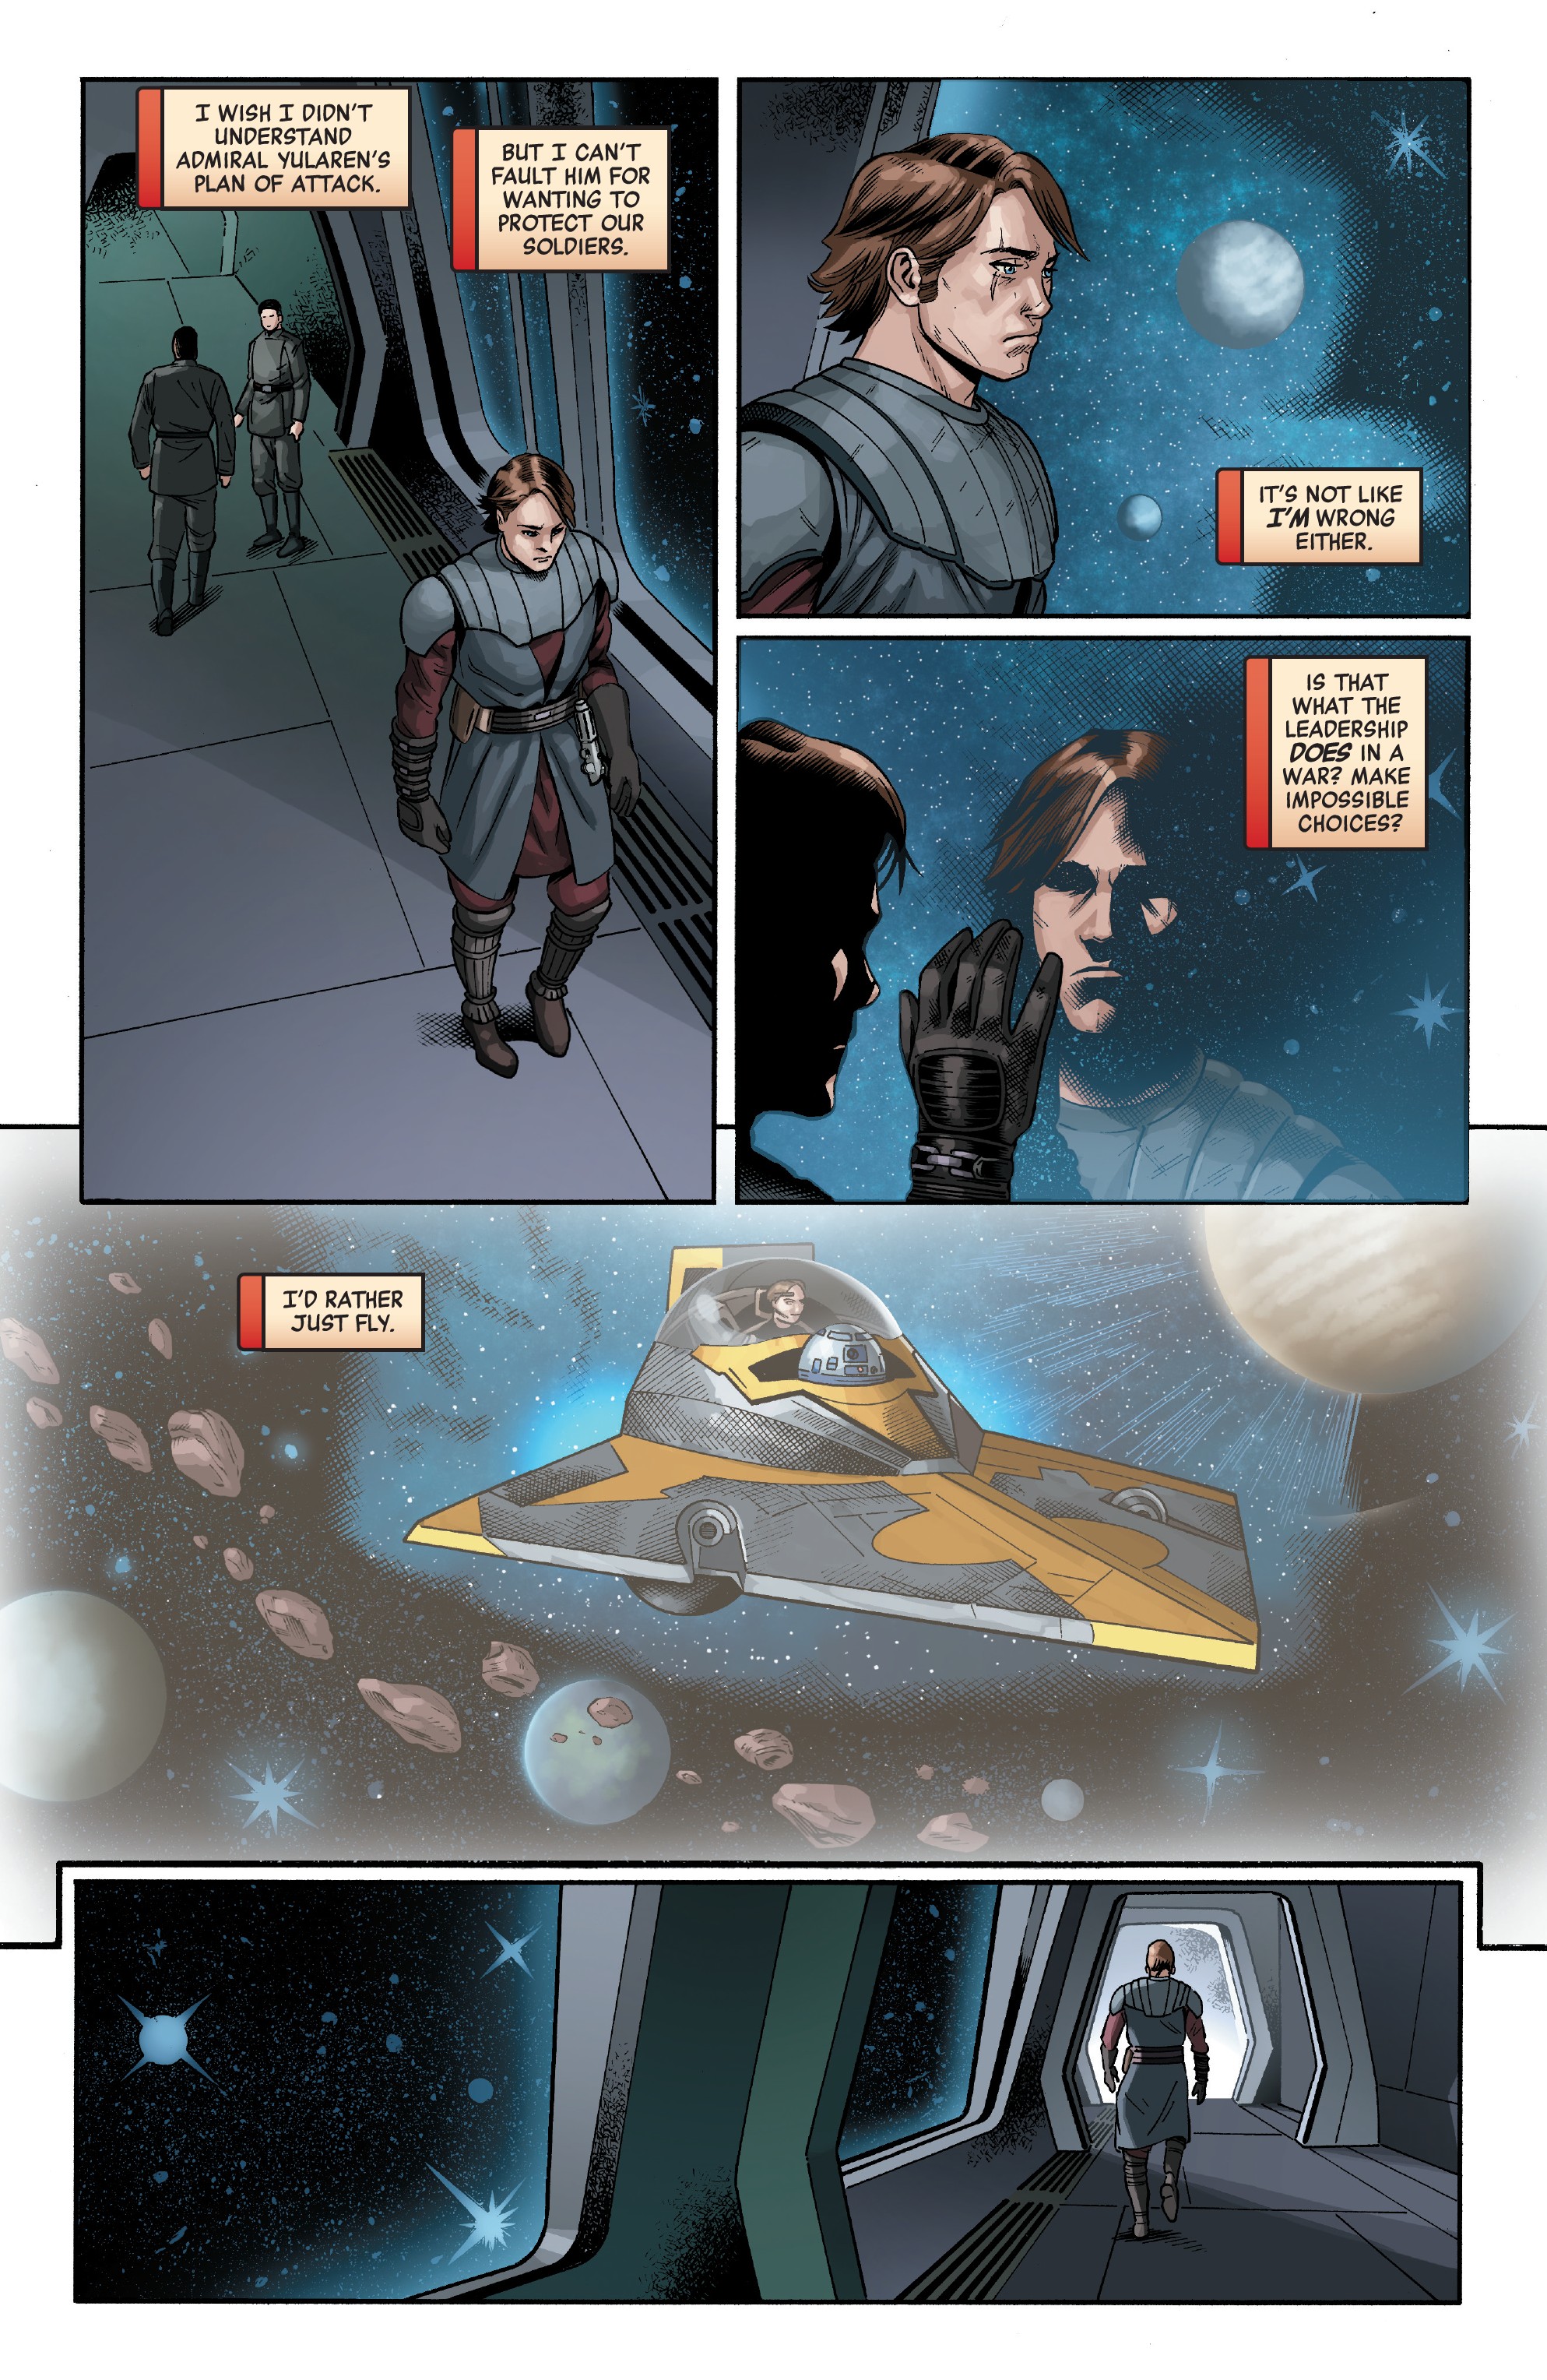 Star Wars Age Of The Republic Anakin Skywalker 2019 Chapter 1 Page 1